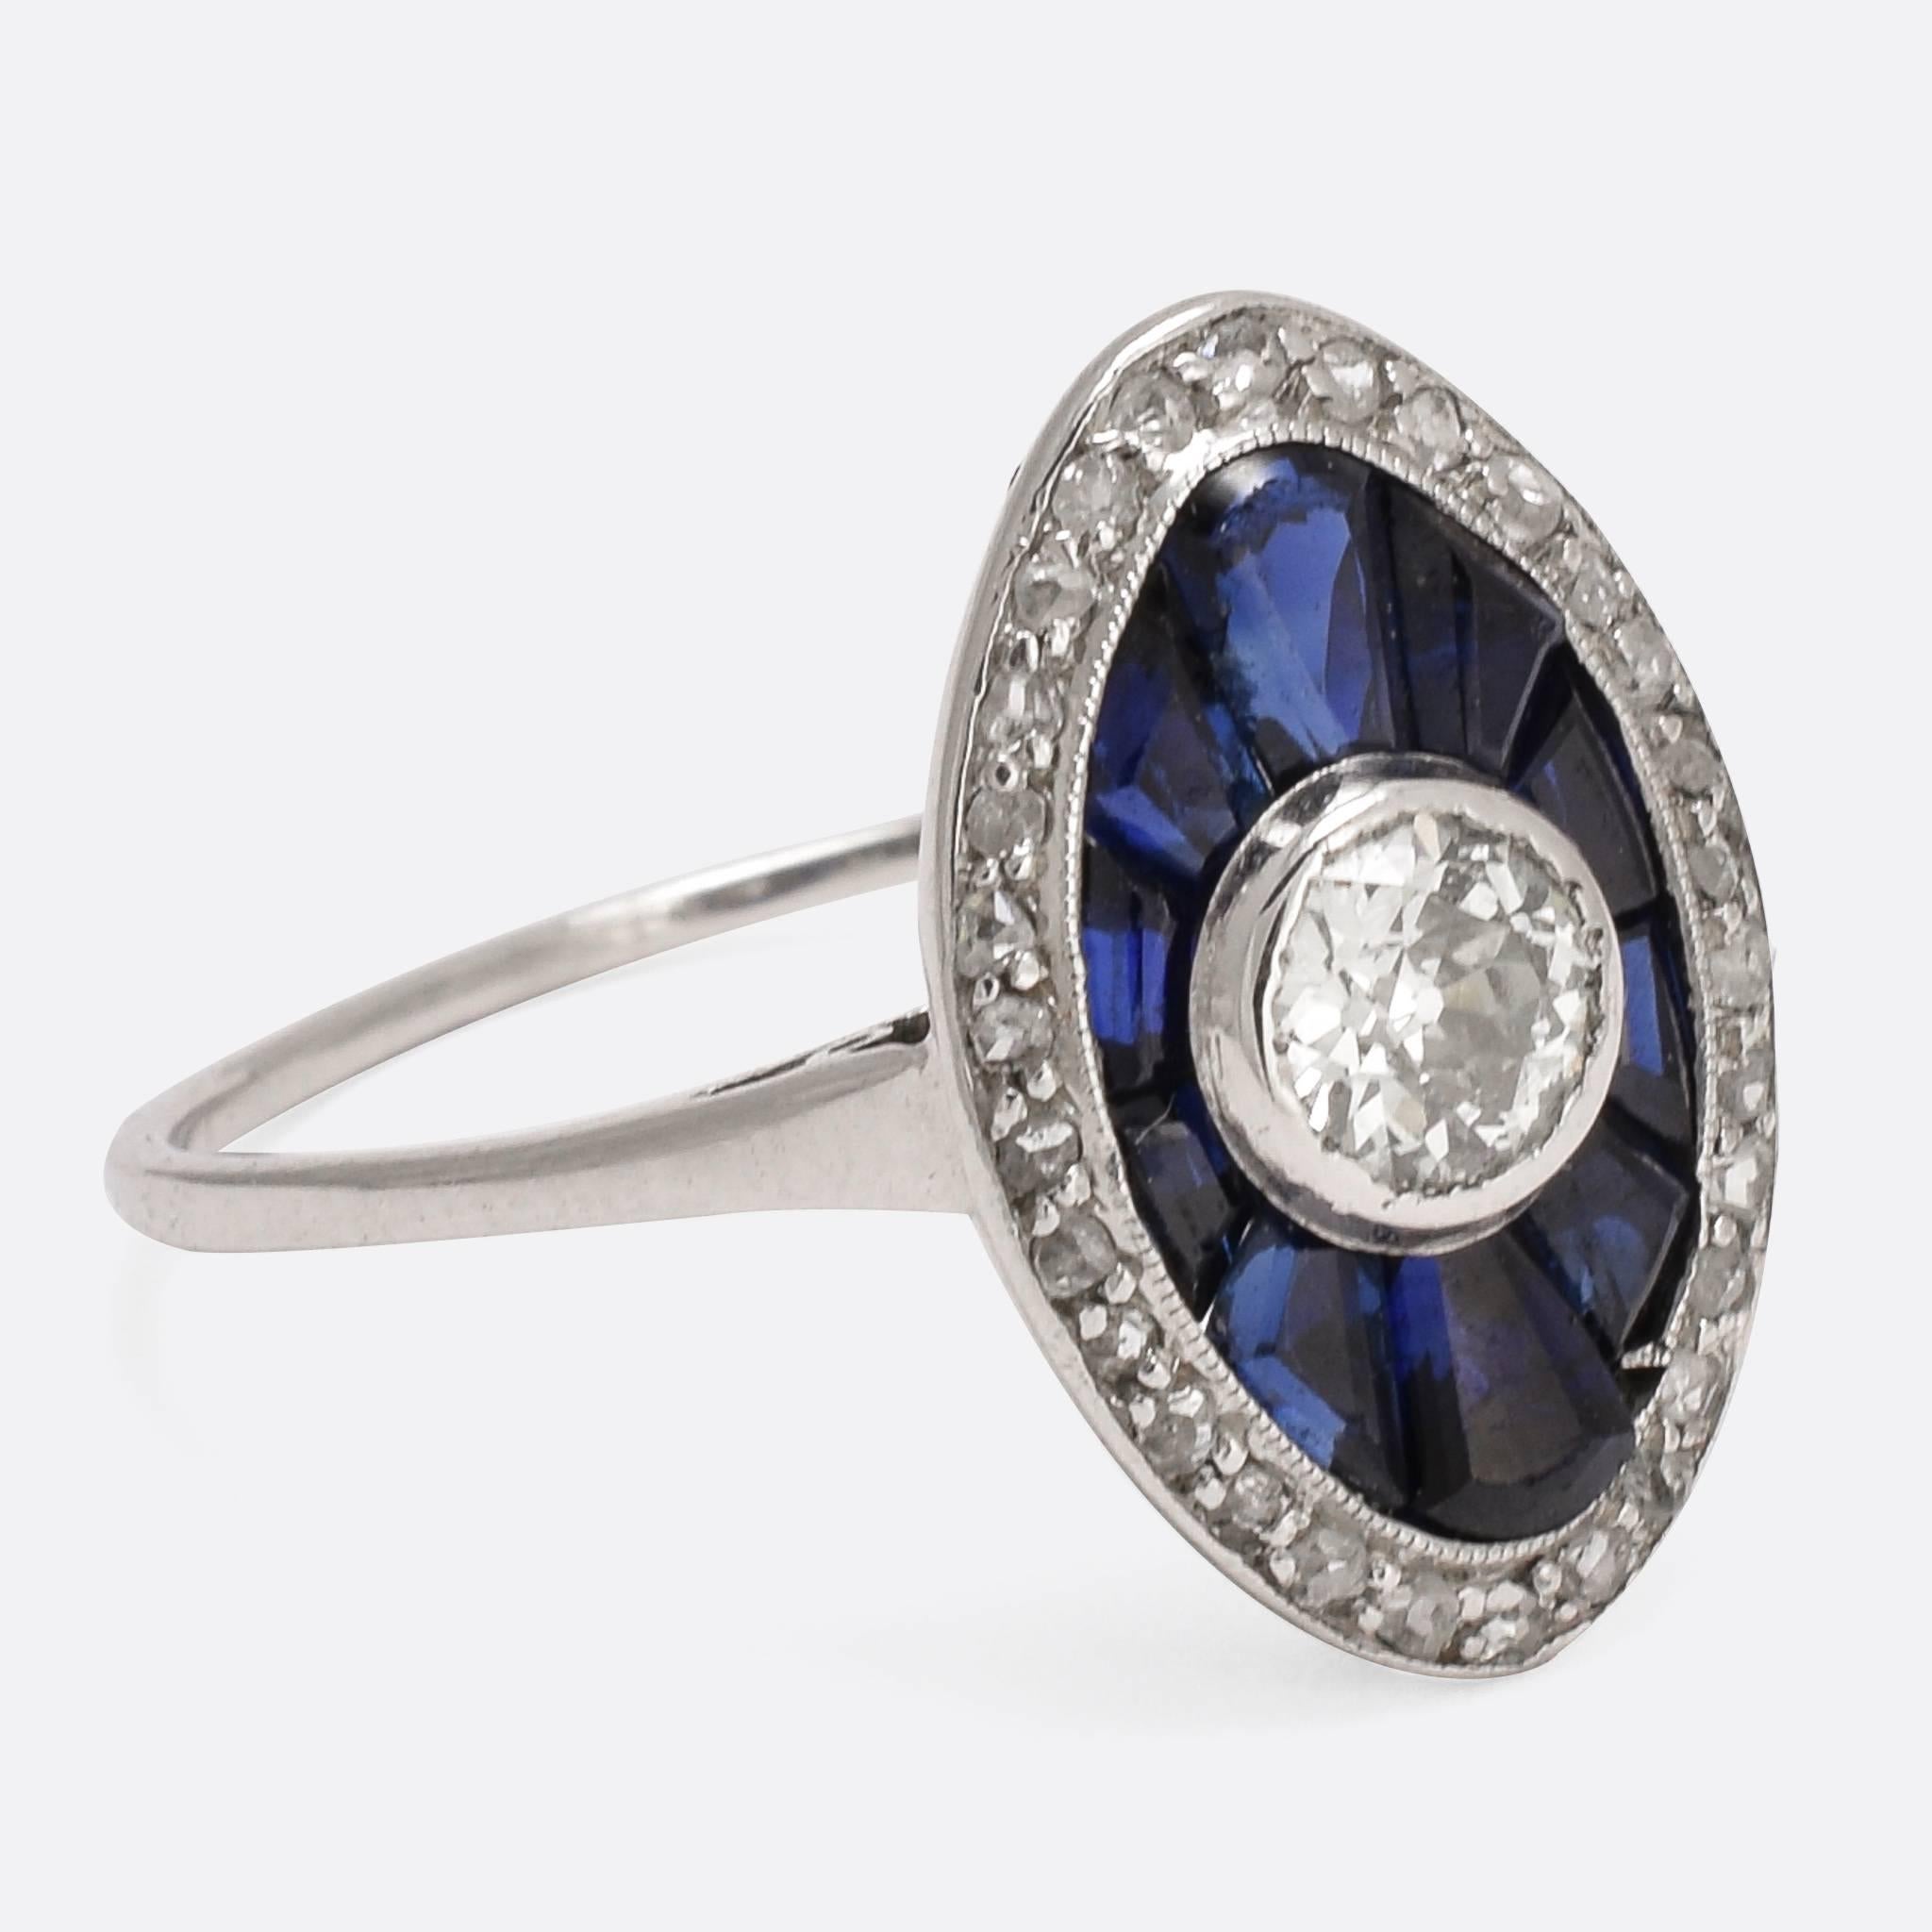 A bold 1920s sapphire and diamond cocktail ring, modelled in platinum throughout. With typical Art Deco styling, the head is set with calibre cut sapphires around a central .42ct old cut diamond. A further halo of diamonds completes the look, in